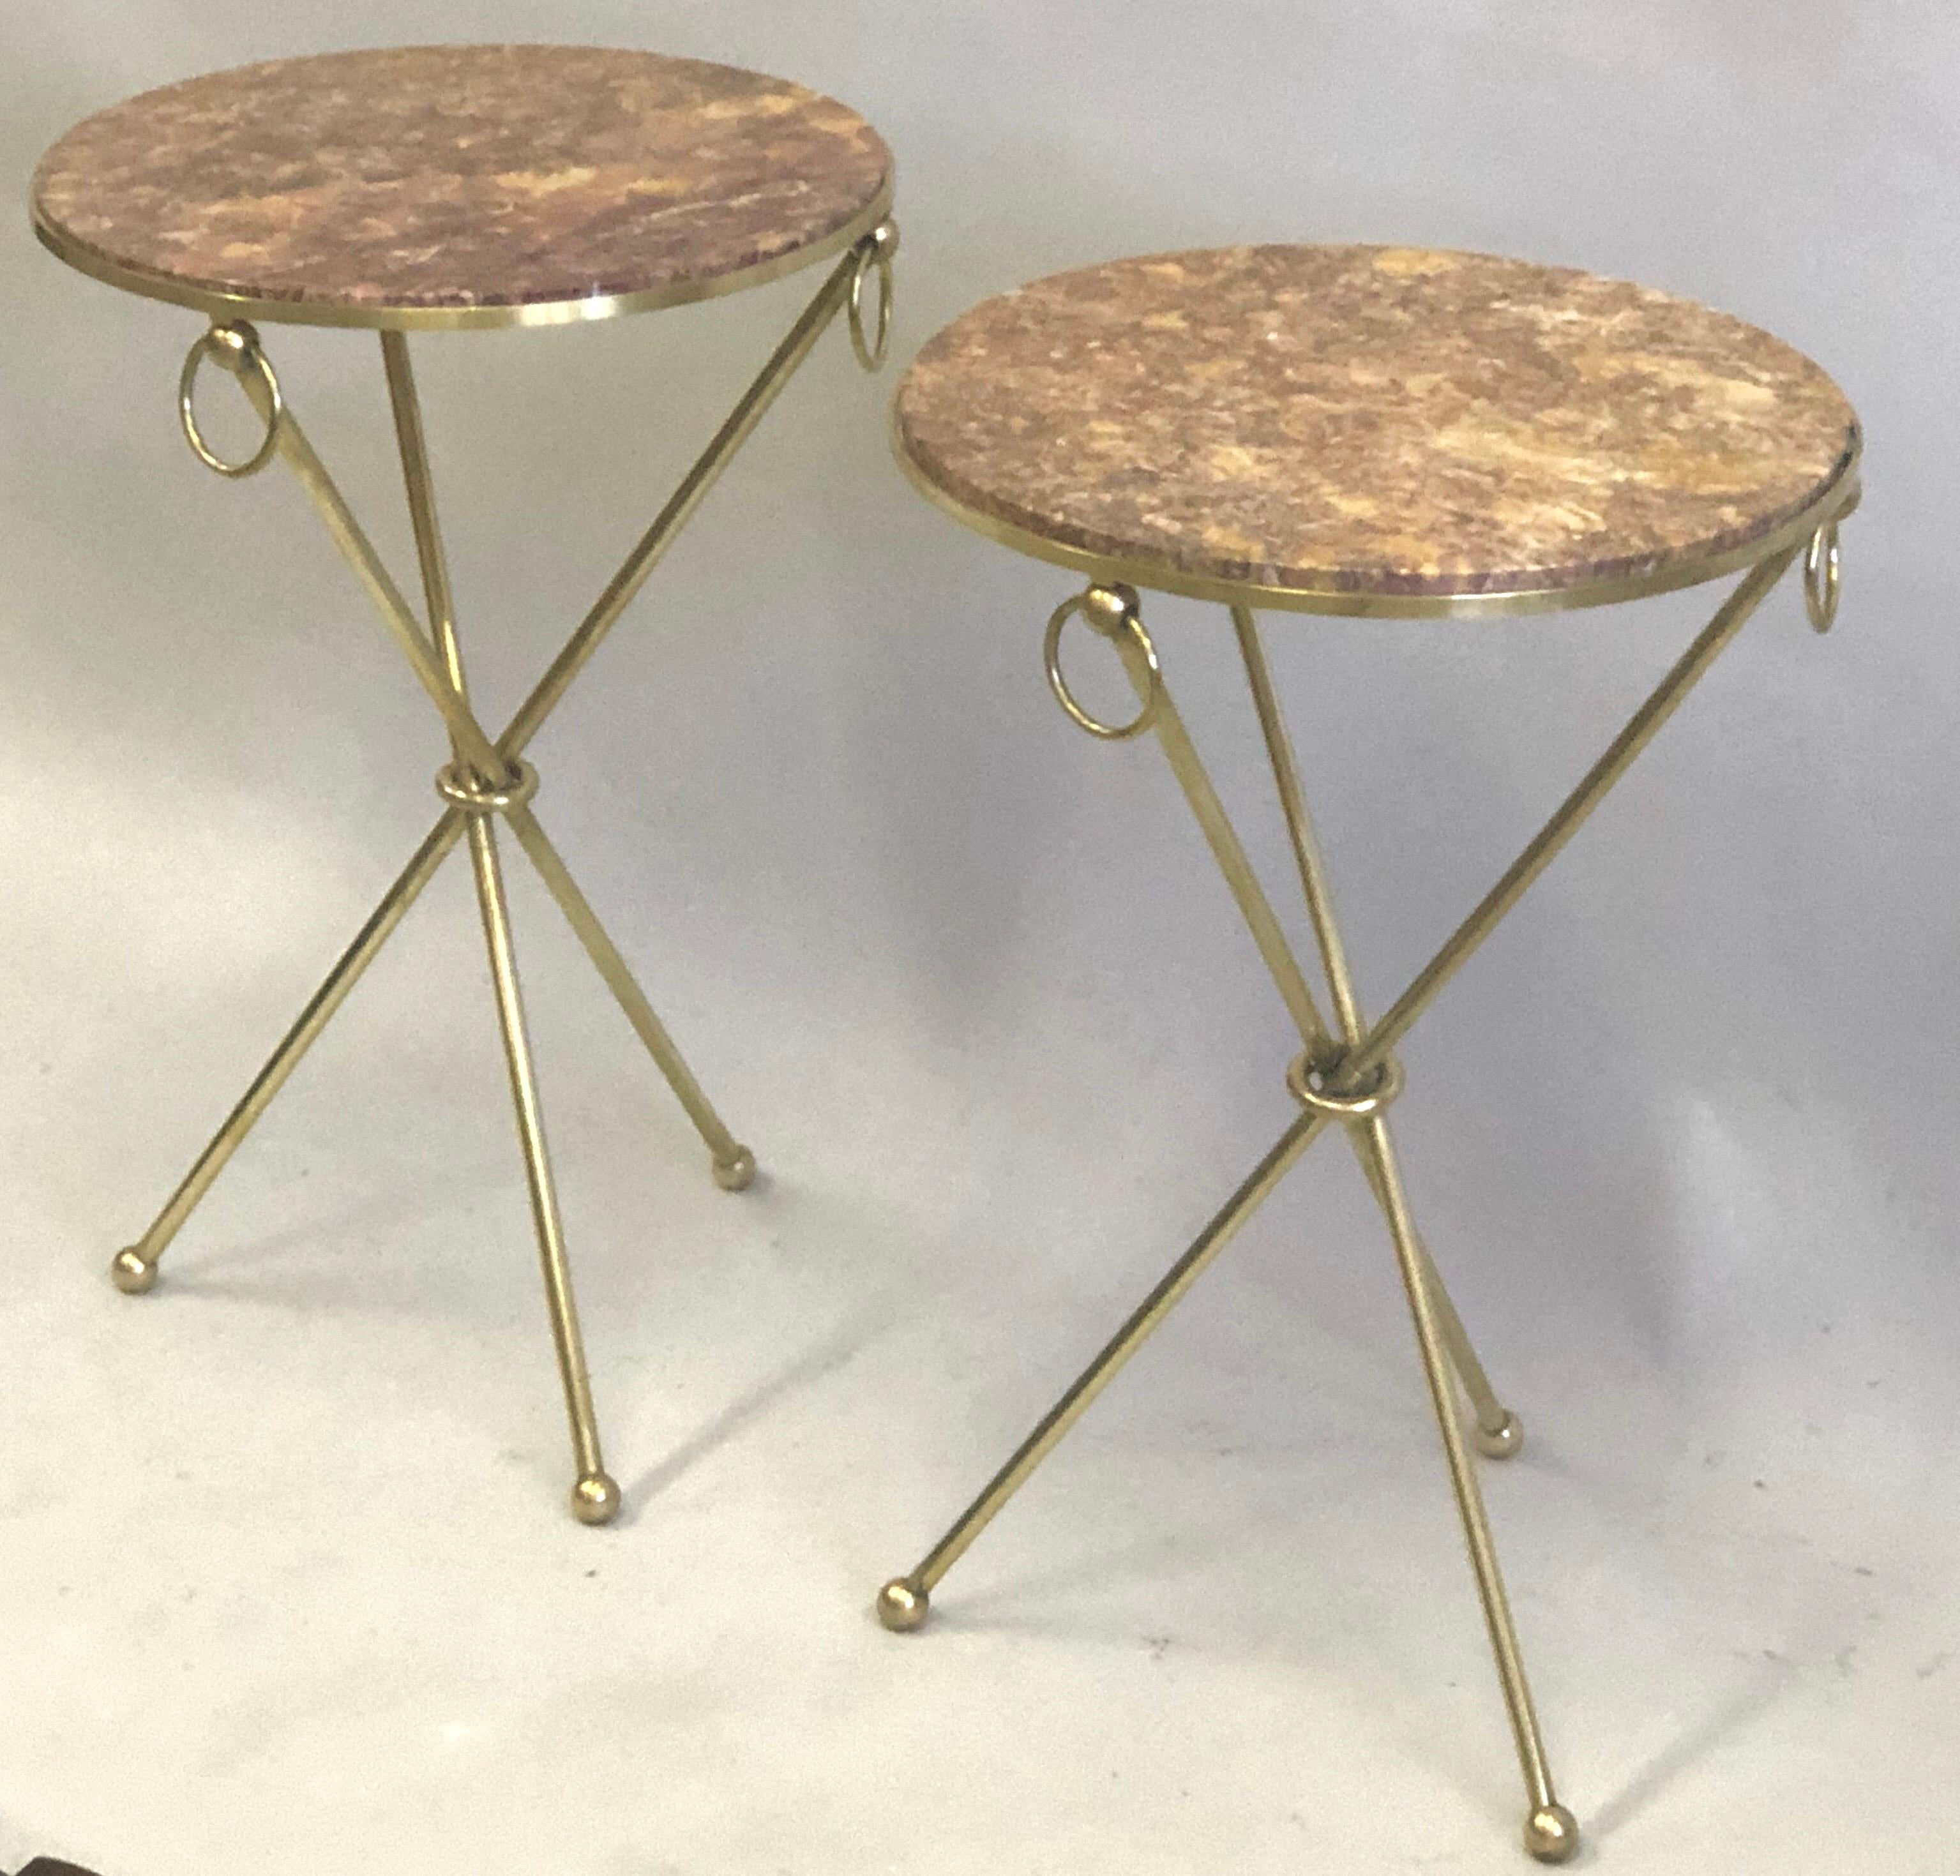 20th Century Pair of French Modern Neoclassical Brass & Marble Side Tables, Jean-Michel Frank